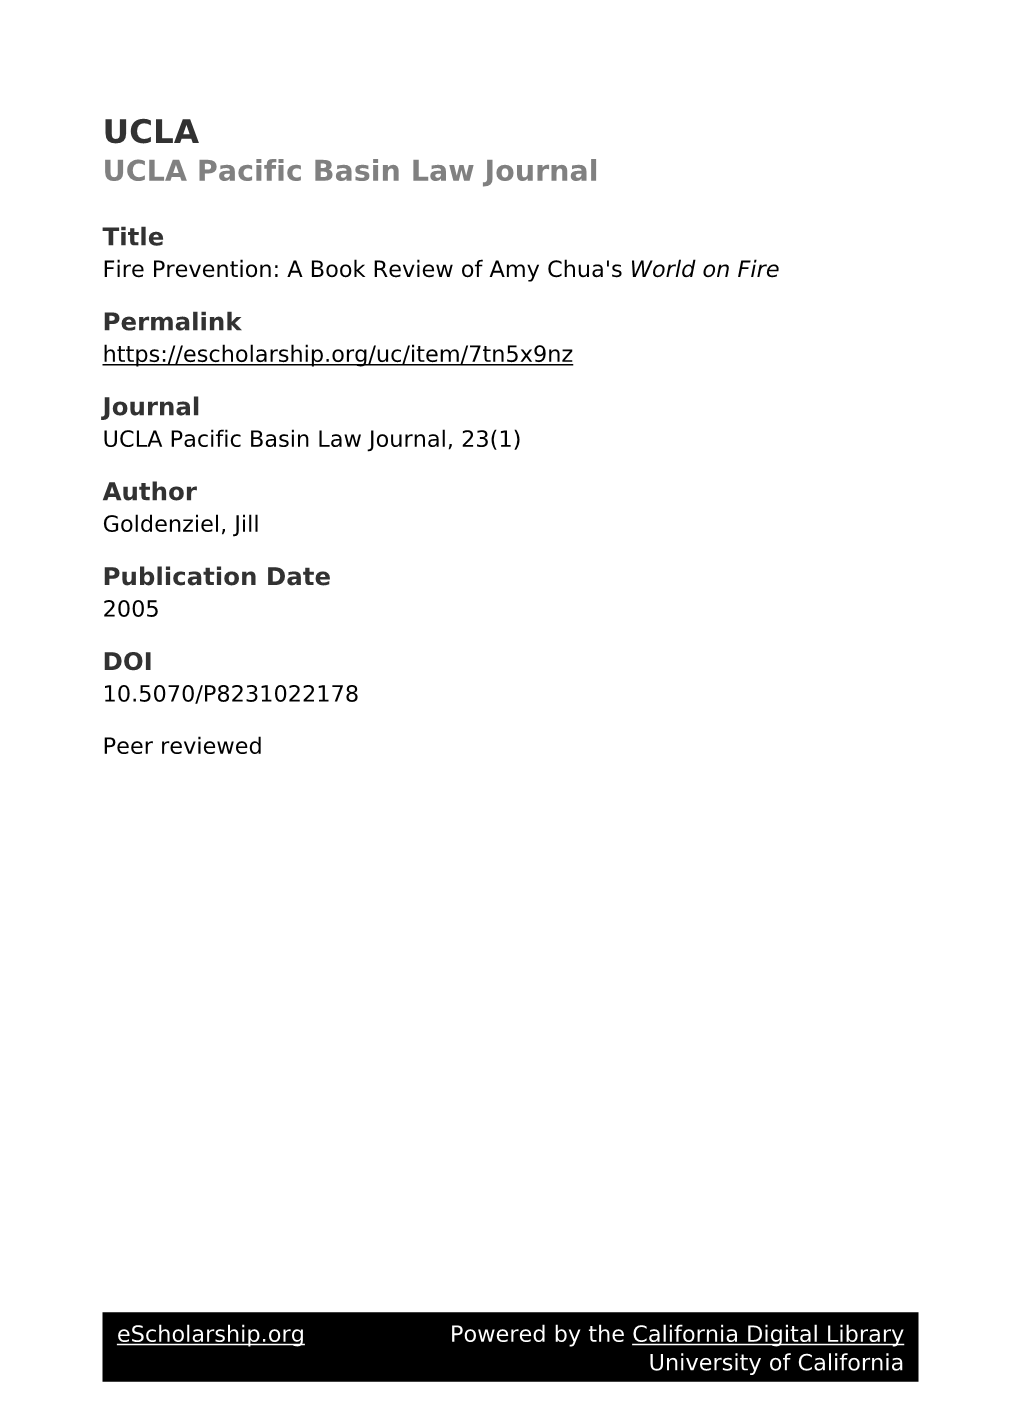 A Book Review of Amy Chua's World on Fire